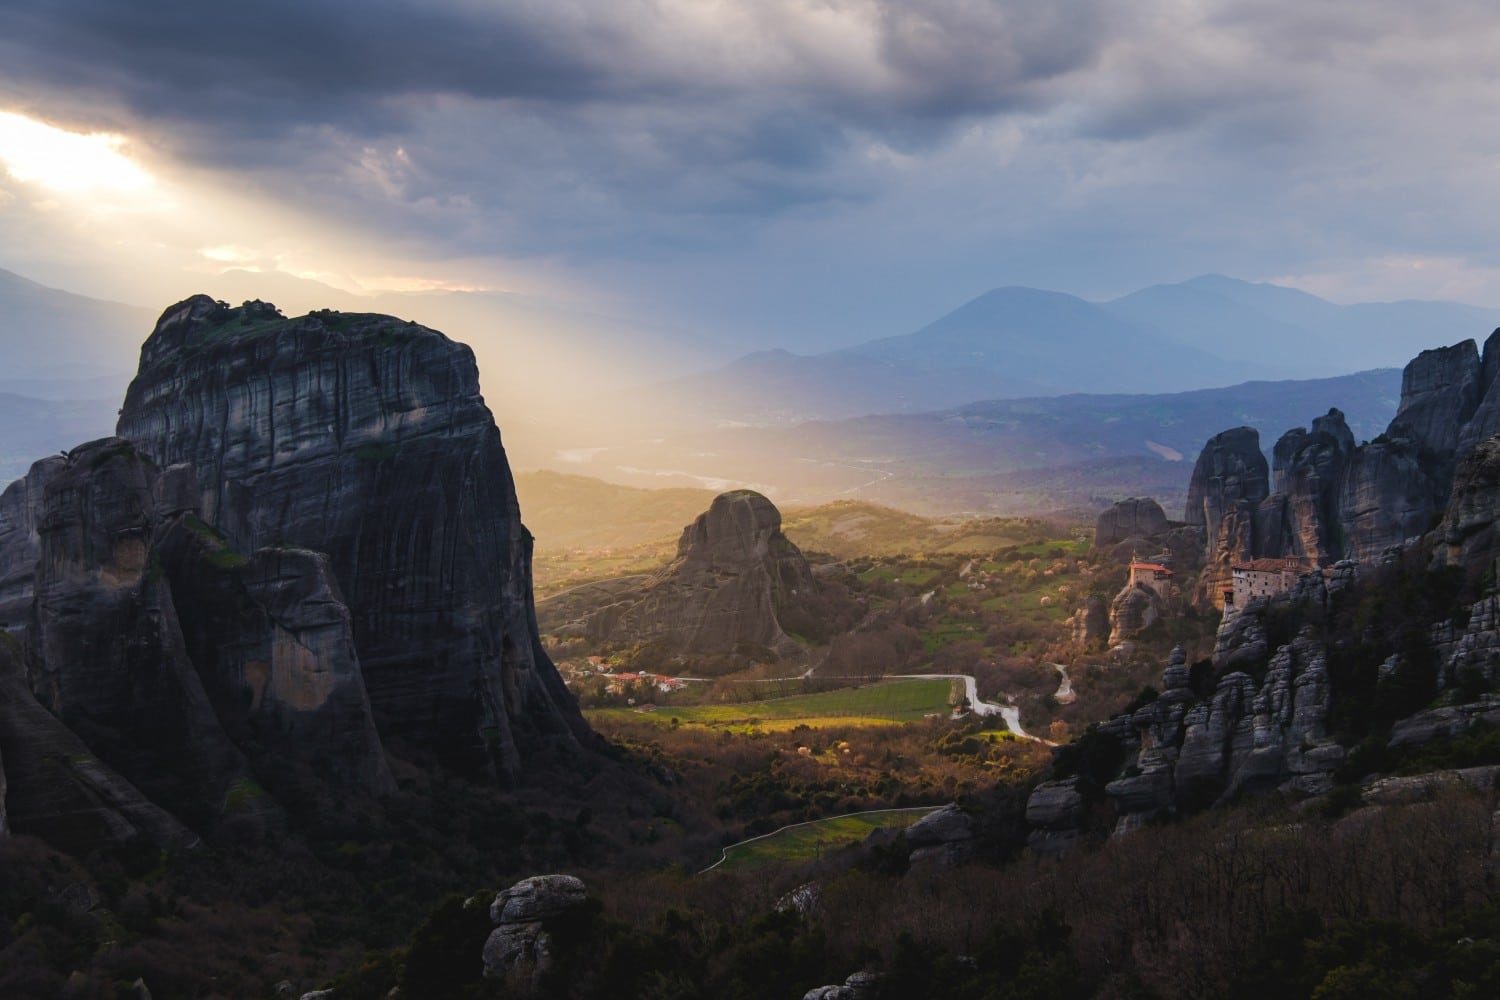 Hiking in Meteora, Greece for some of the best hiking in Europe